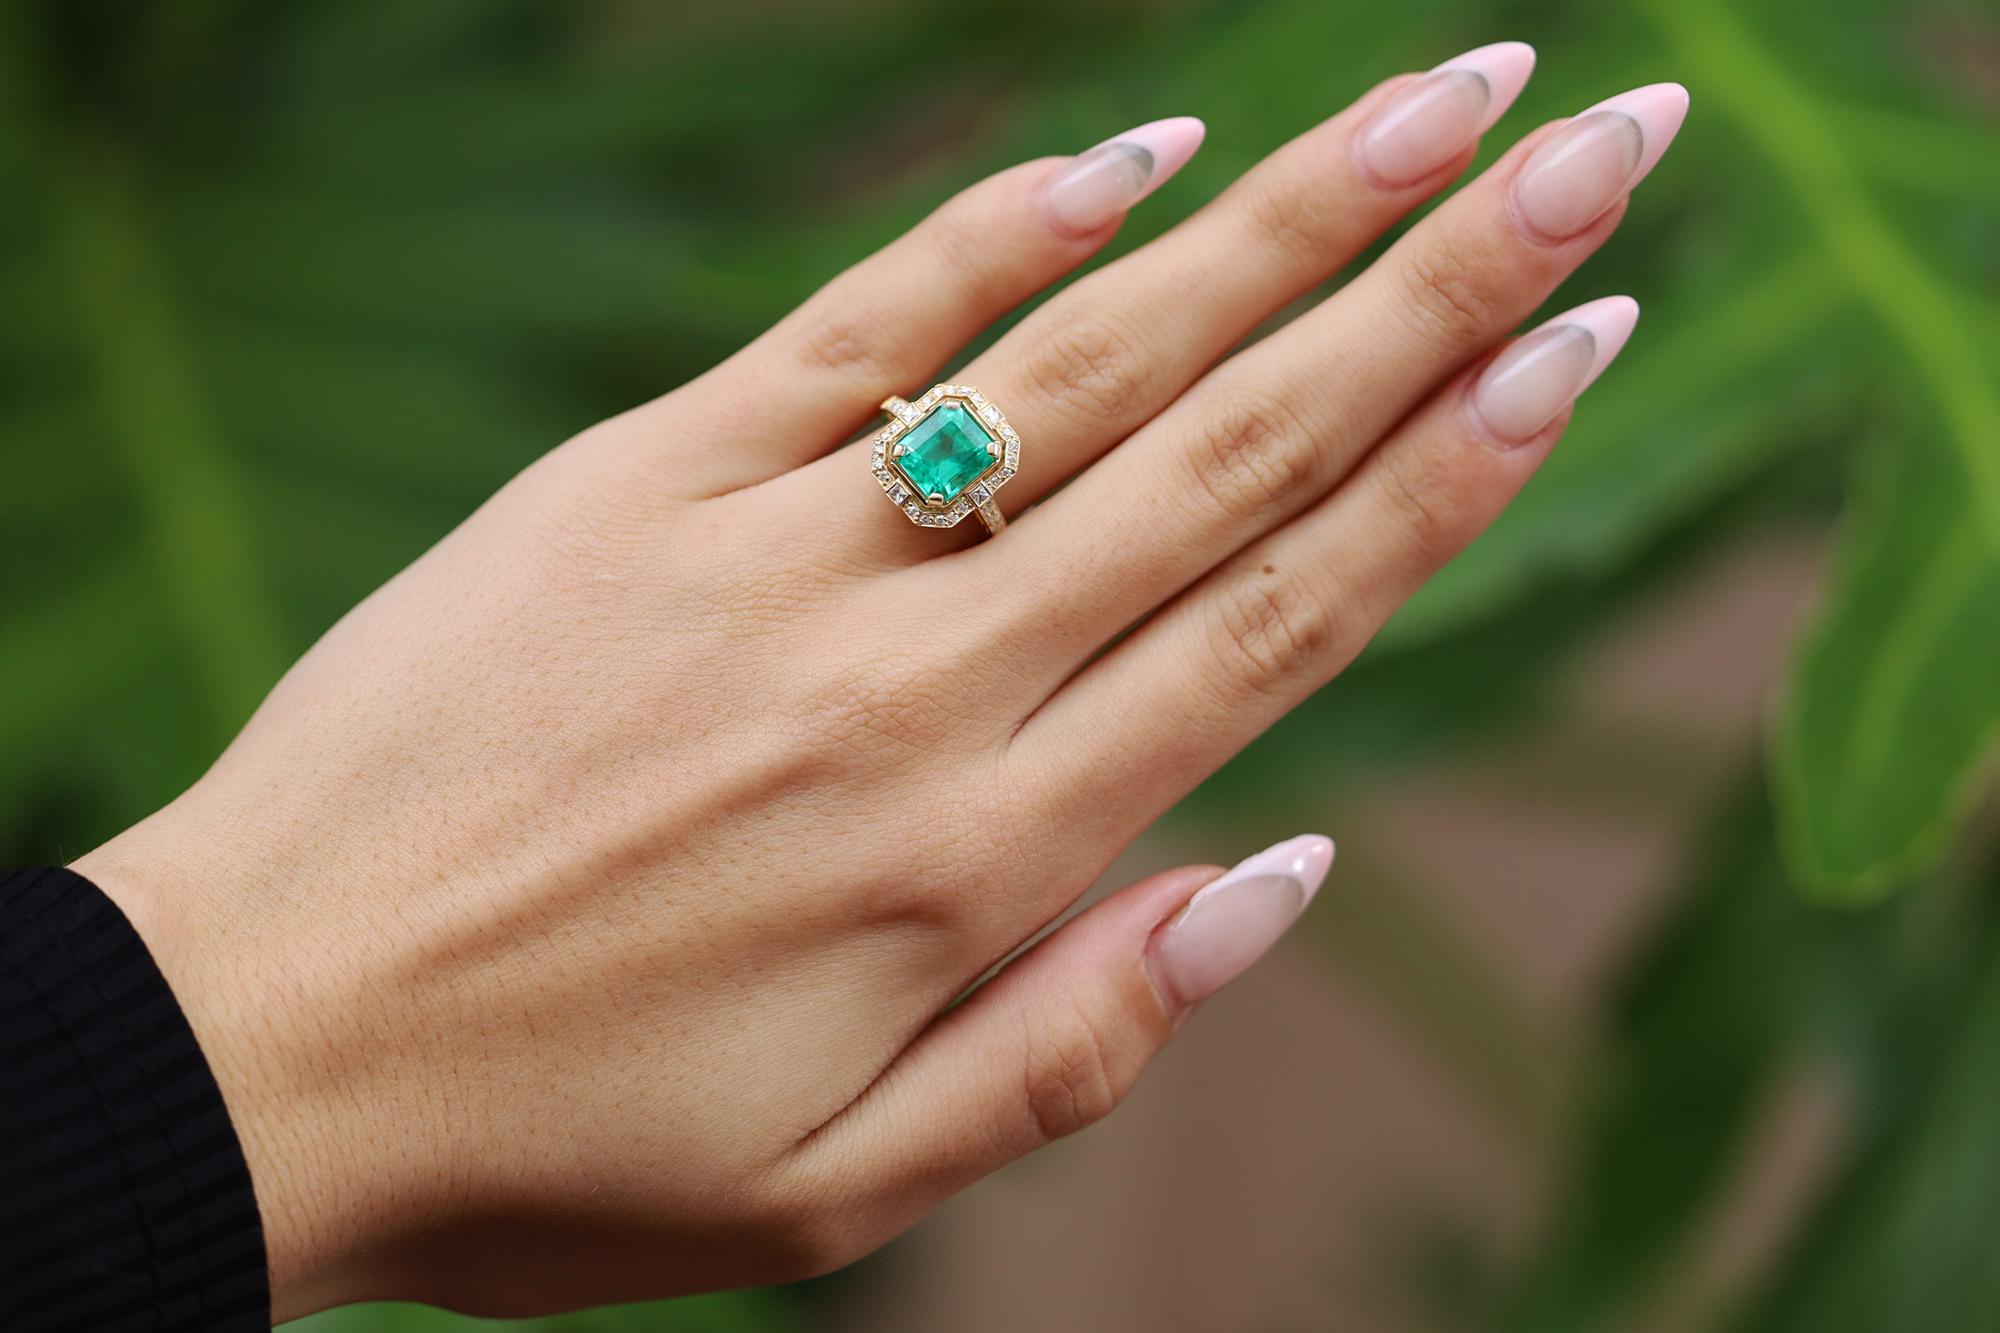 A classic, classy Colombian emerald ring centering upon a GIA certified 2.59 carat step cut beauty with a vibrant and verdant green color. Set in an 18k yellow gold Art Deco inspired mounting enhanced by old mine cut and French cut diamonds, all